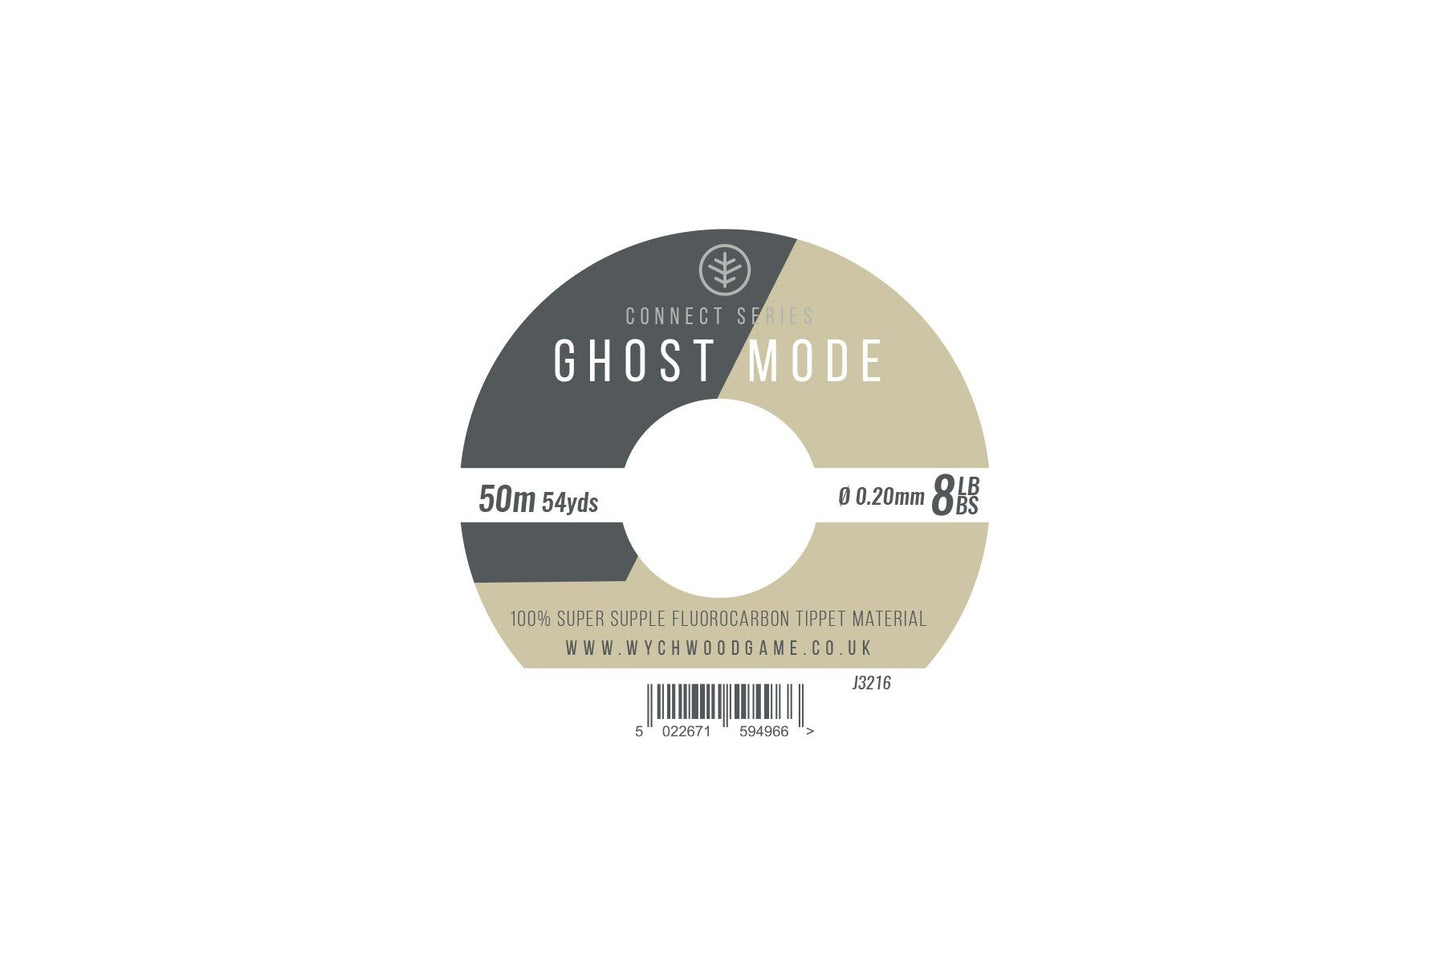 Wychwood Ghost Mode Fluorocarbon 50m Tippet 8lb